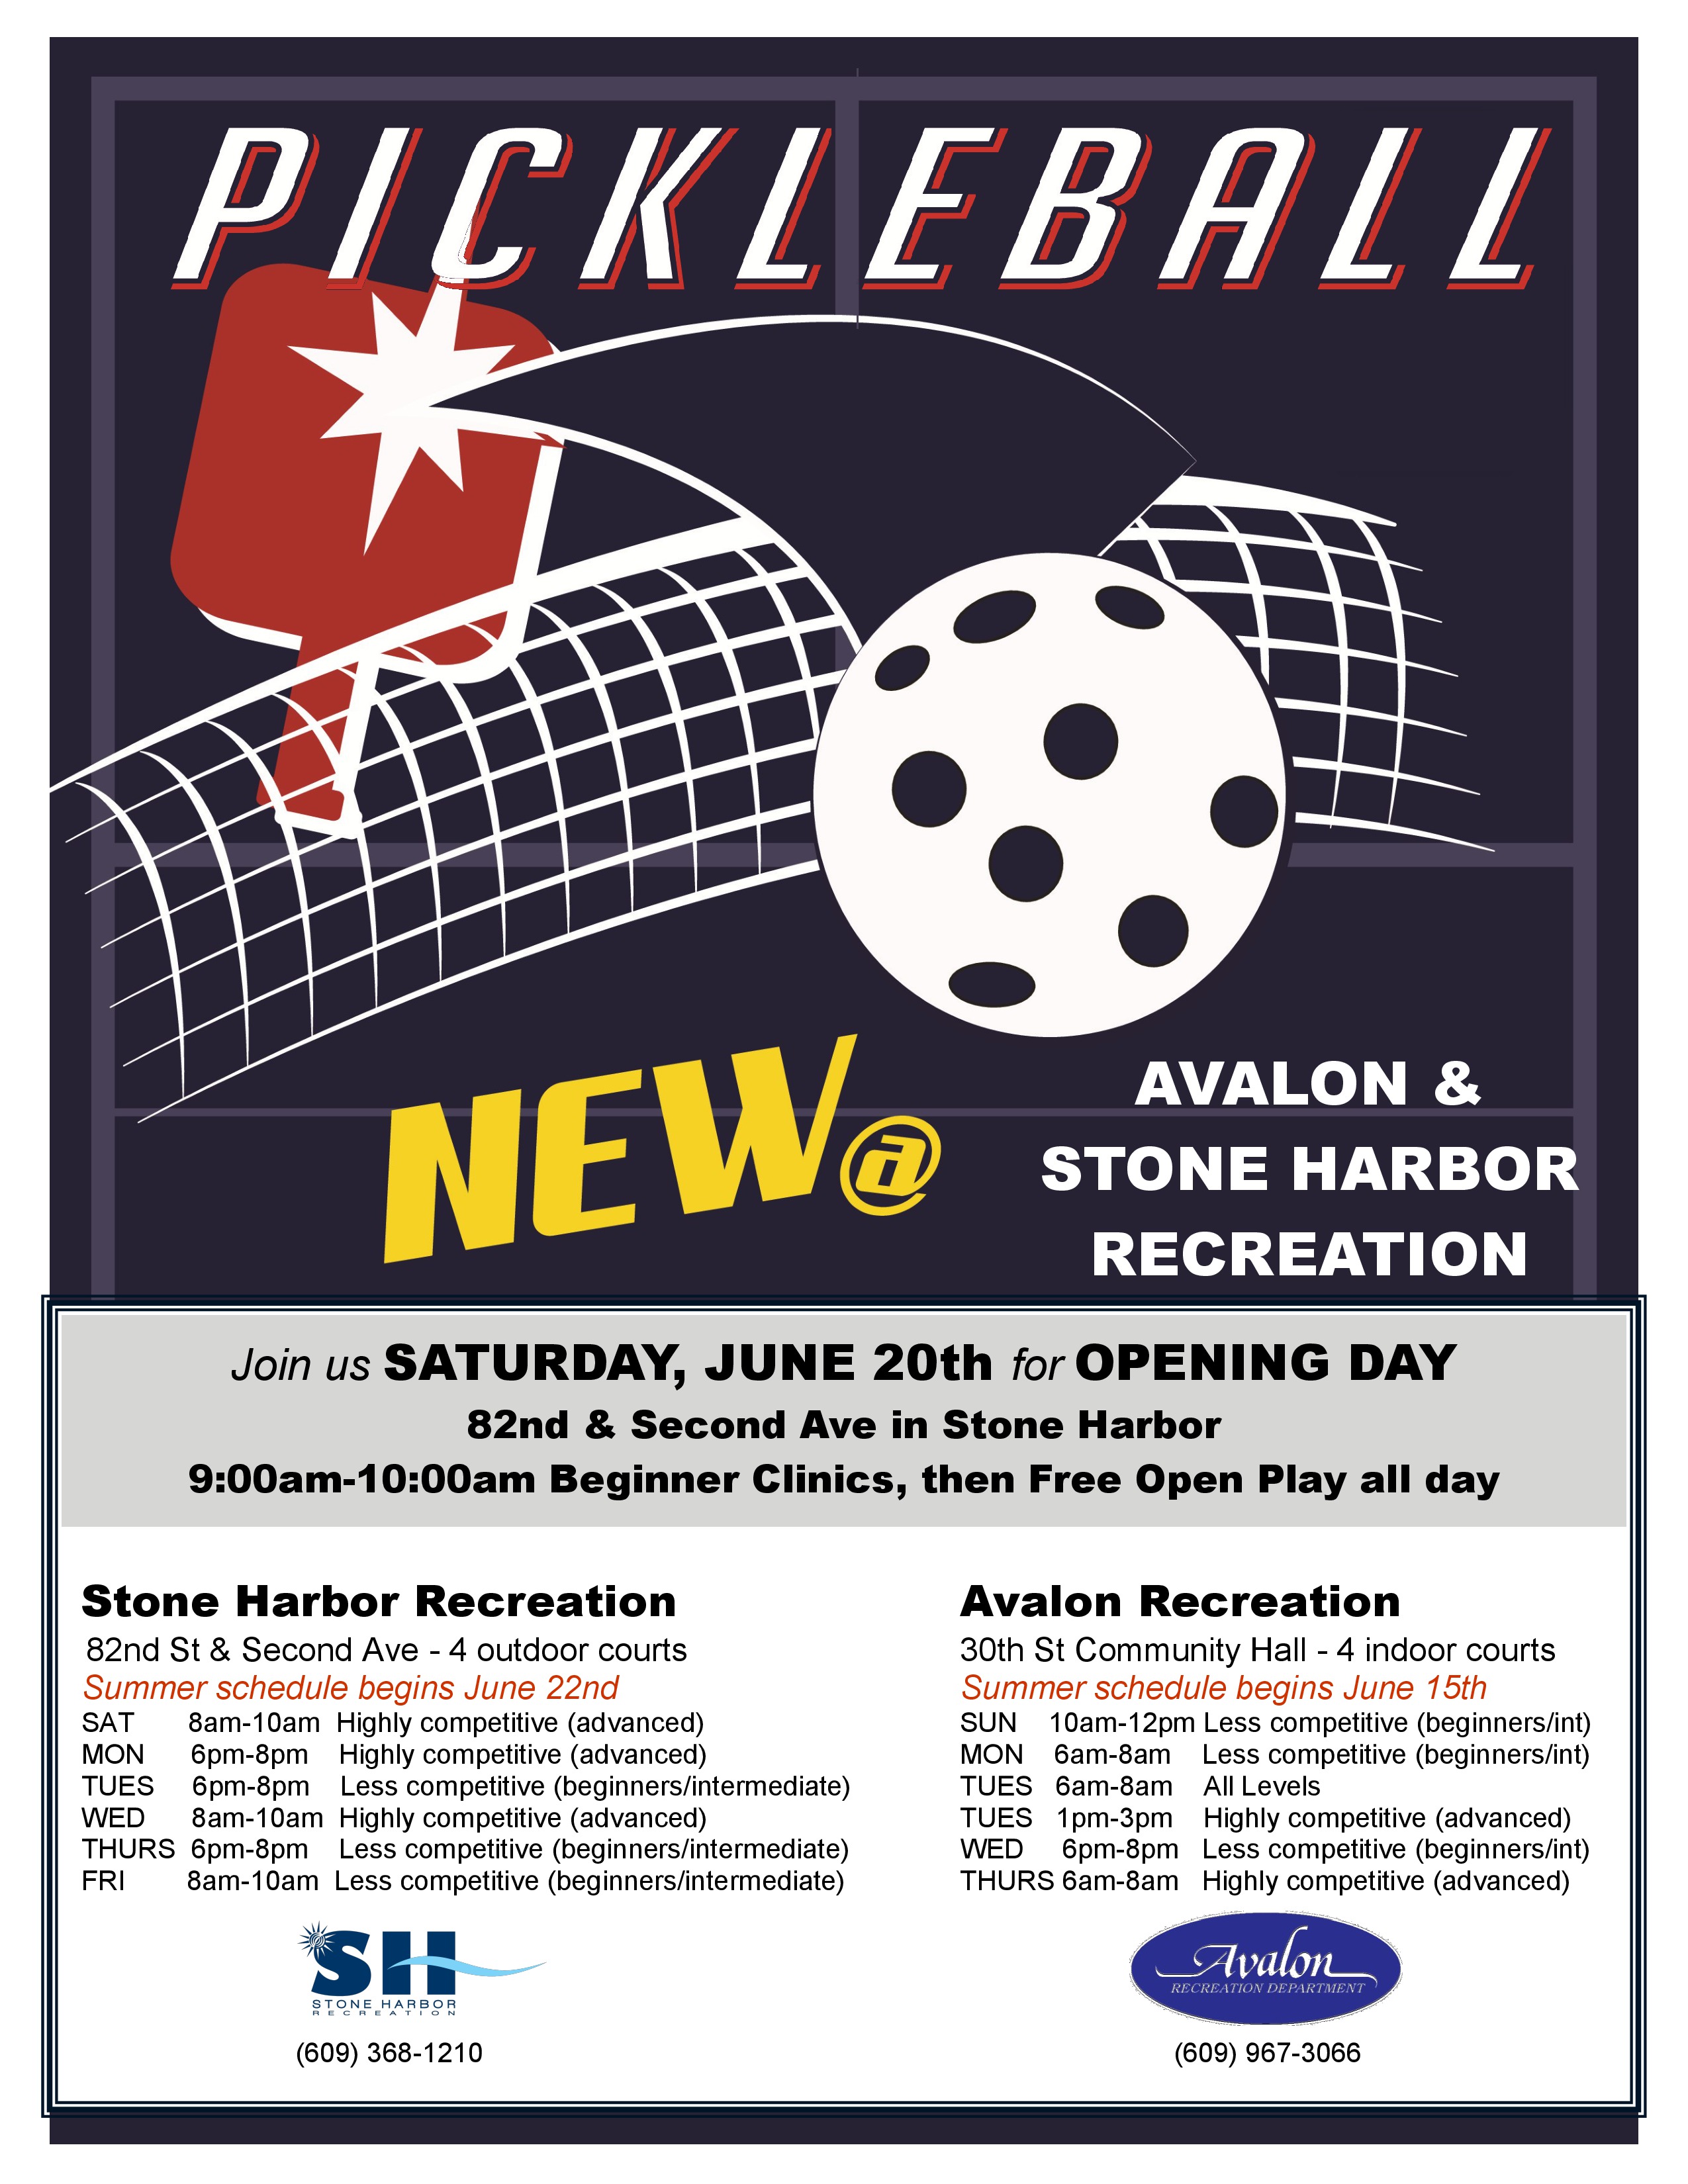 Stone Harbor introduces Pickleball to 82nd Street Recreation! Borough